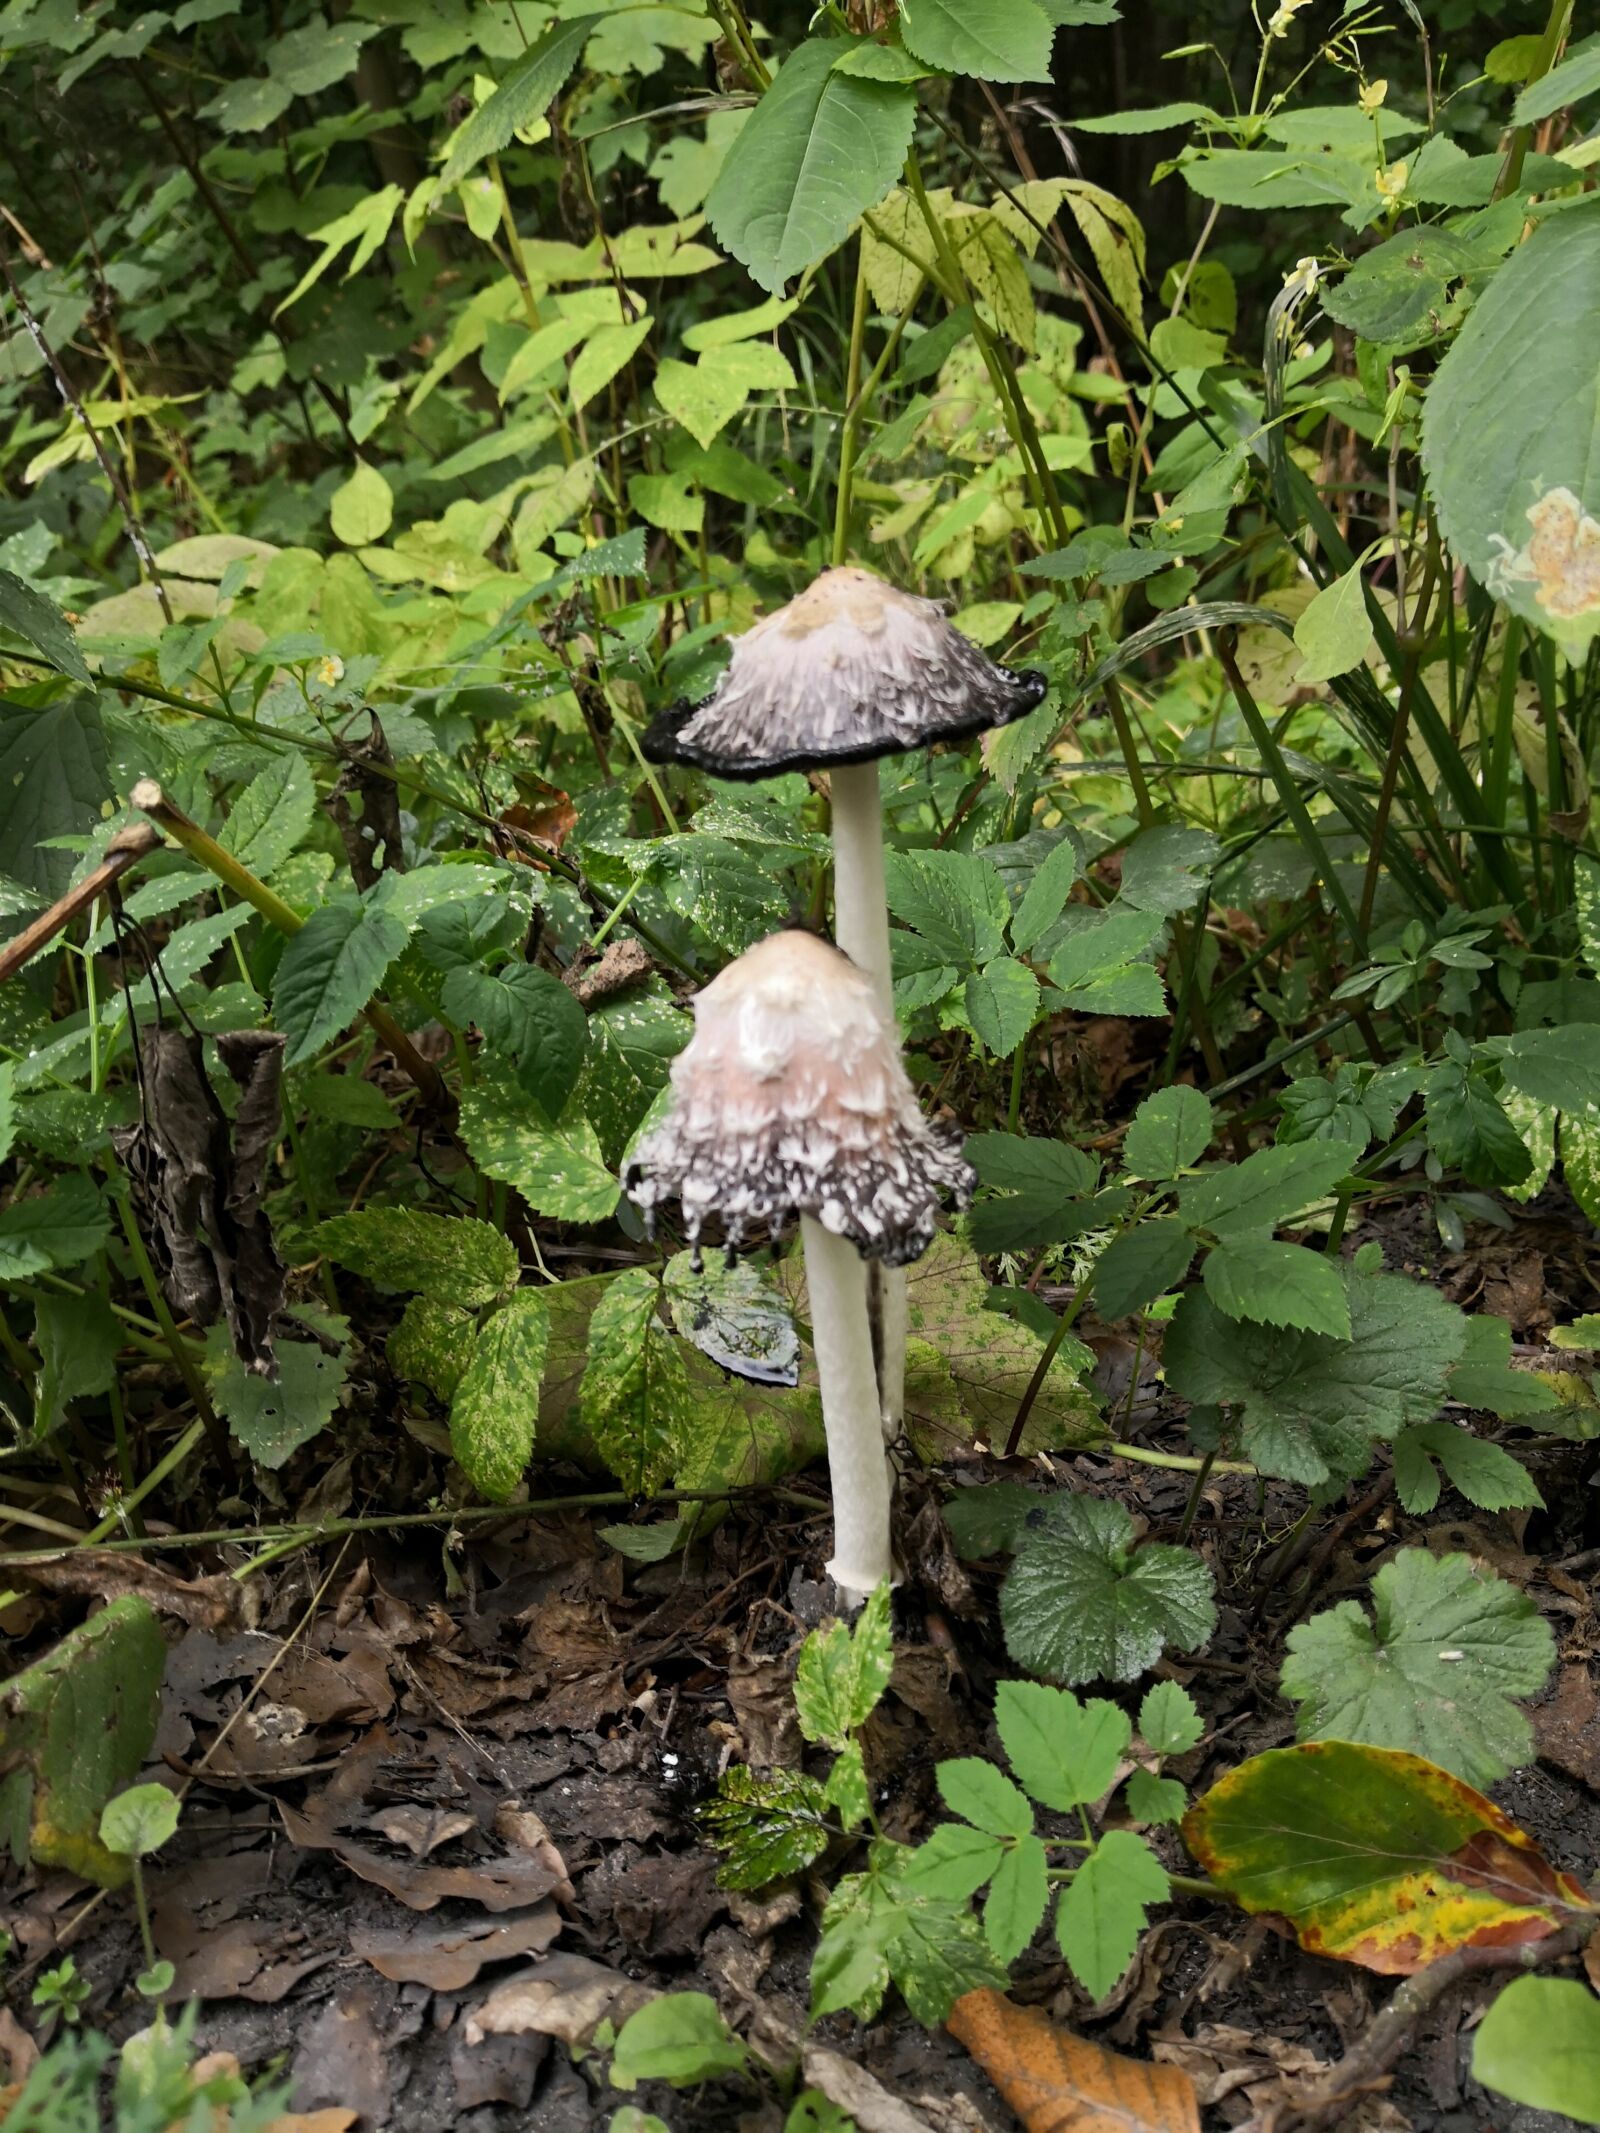 HUAWEI Mate 10 Pro sample photo. Mushroom, forest, green photography